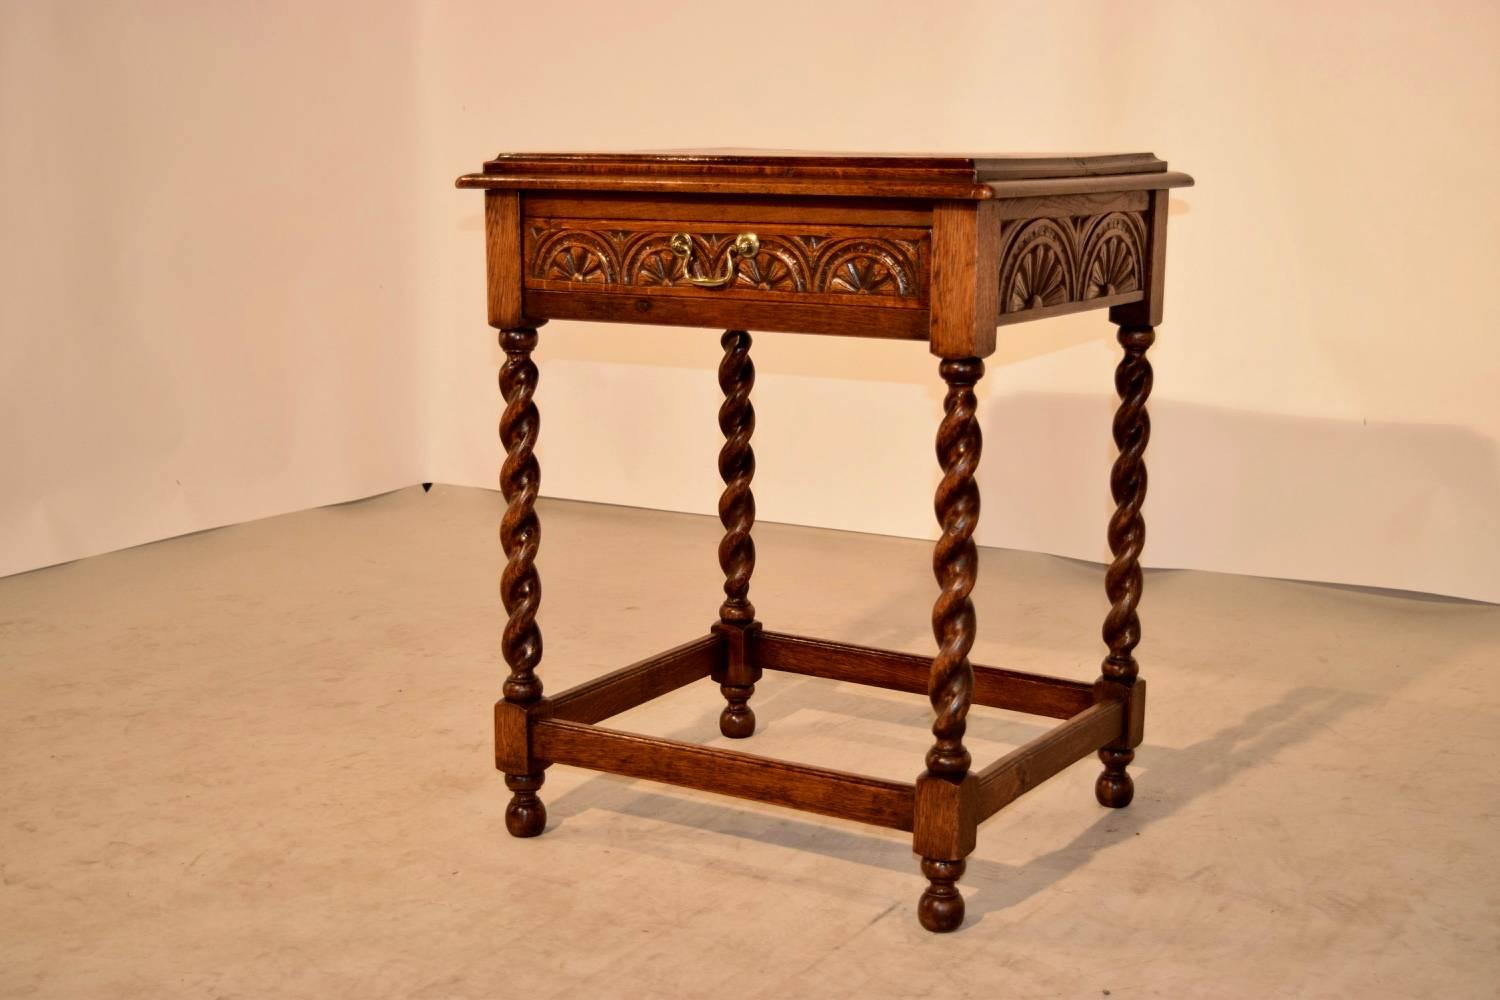 19th century English oak side table with a two board top which has a raised molded edge, following down to lovely carving on all four sides for easy placement in any room. The front contains a single drawer, and the table is raised on hand-turned